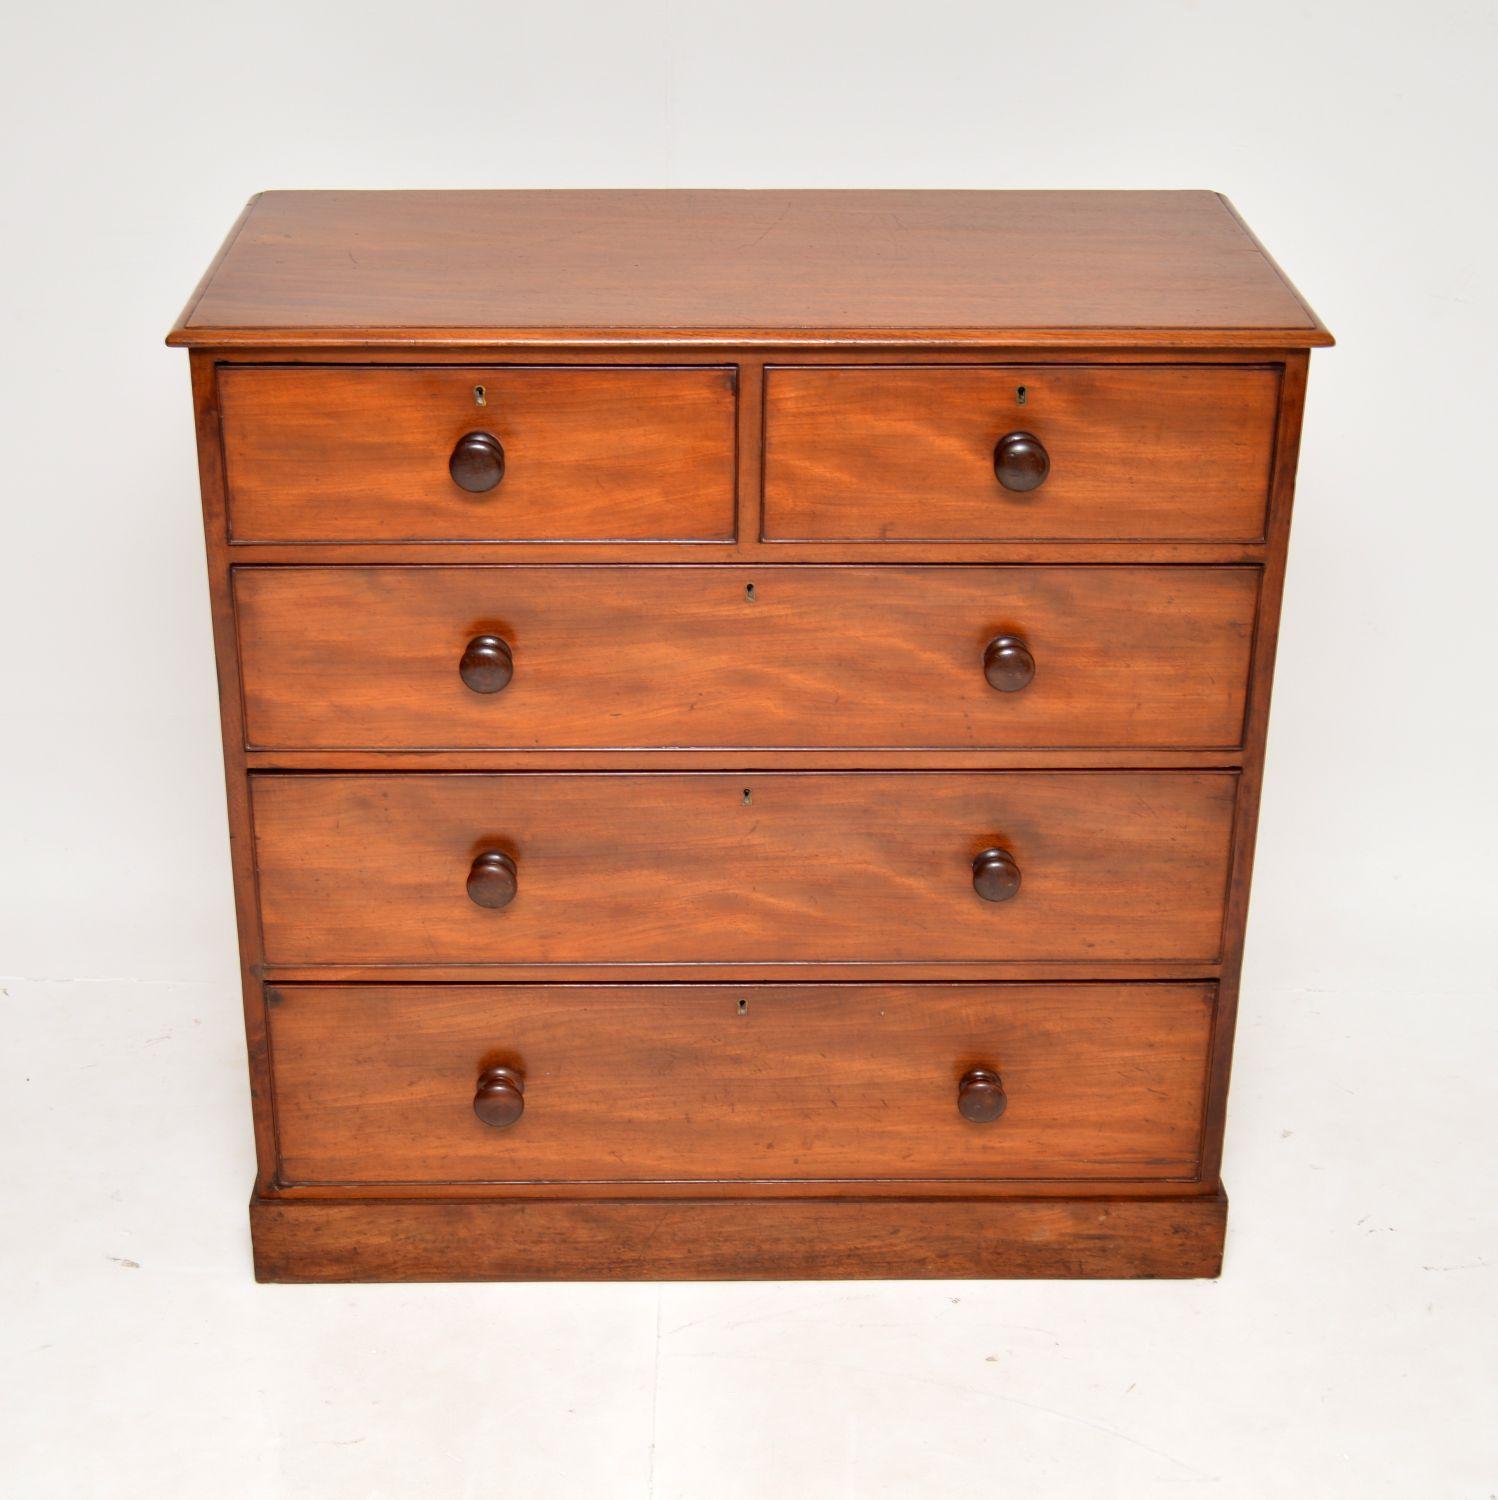 A superb antique Victorian chest of drawers. This was made in England, it dates from around the 1860-1880’s.

It is a great size and is extremely well made. There are five generous drawers with turned handles and fine hand cut dovetailed joints; all